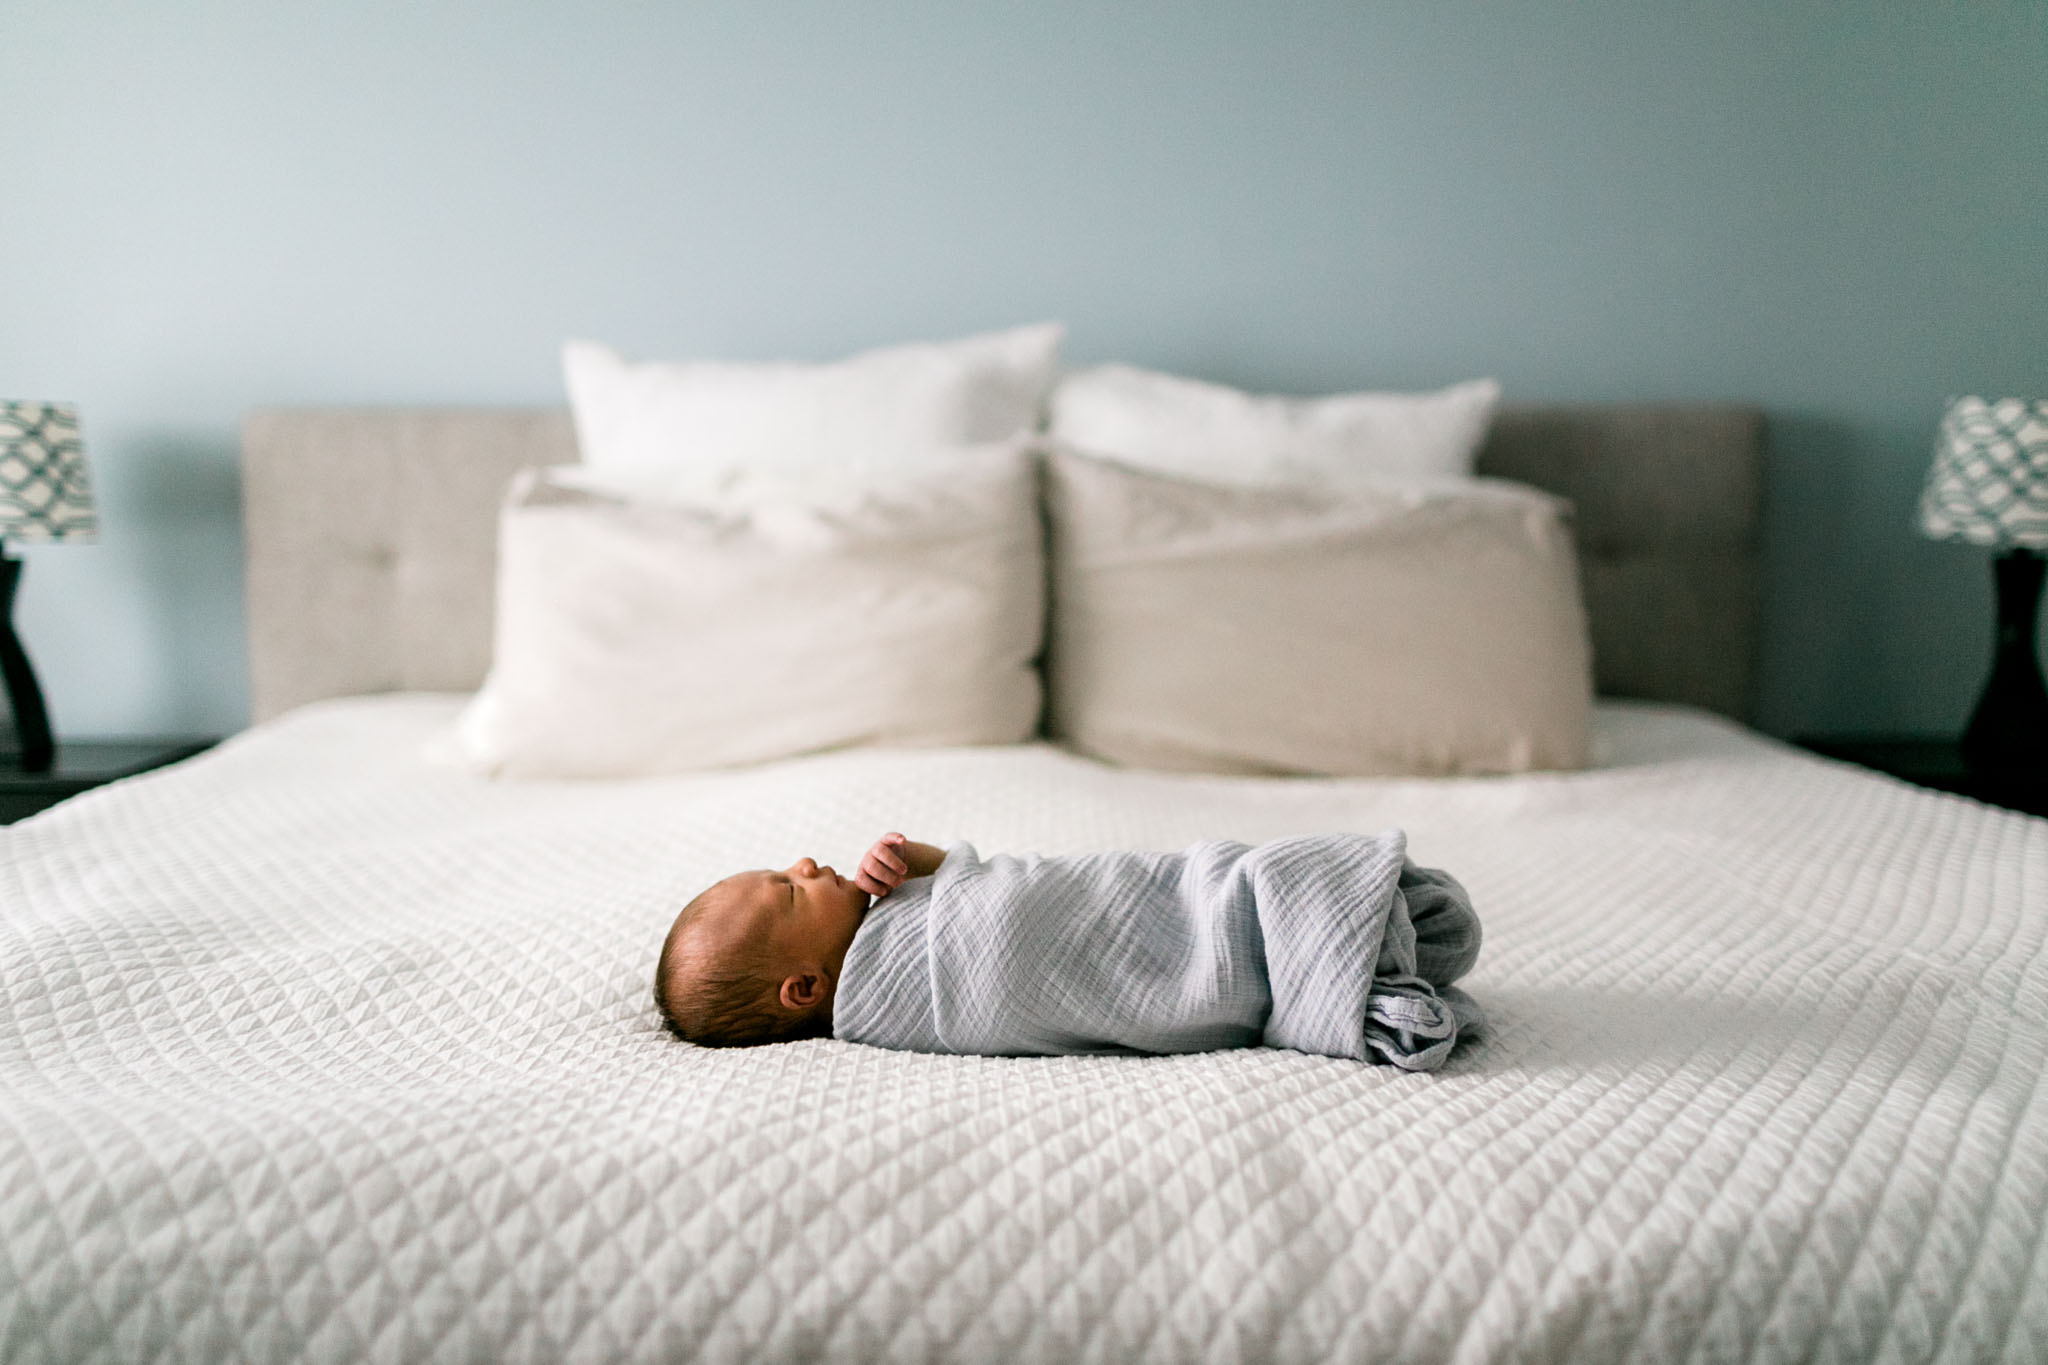 Baby on white bed sleeping | Durham Newborn Photographer | By G. Lin Photography 